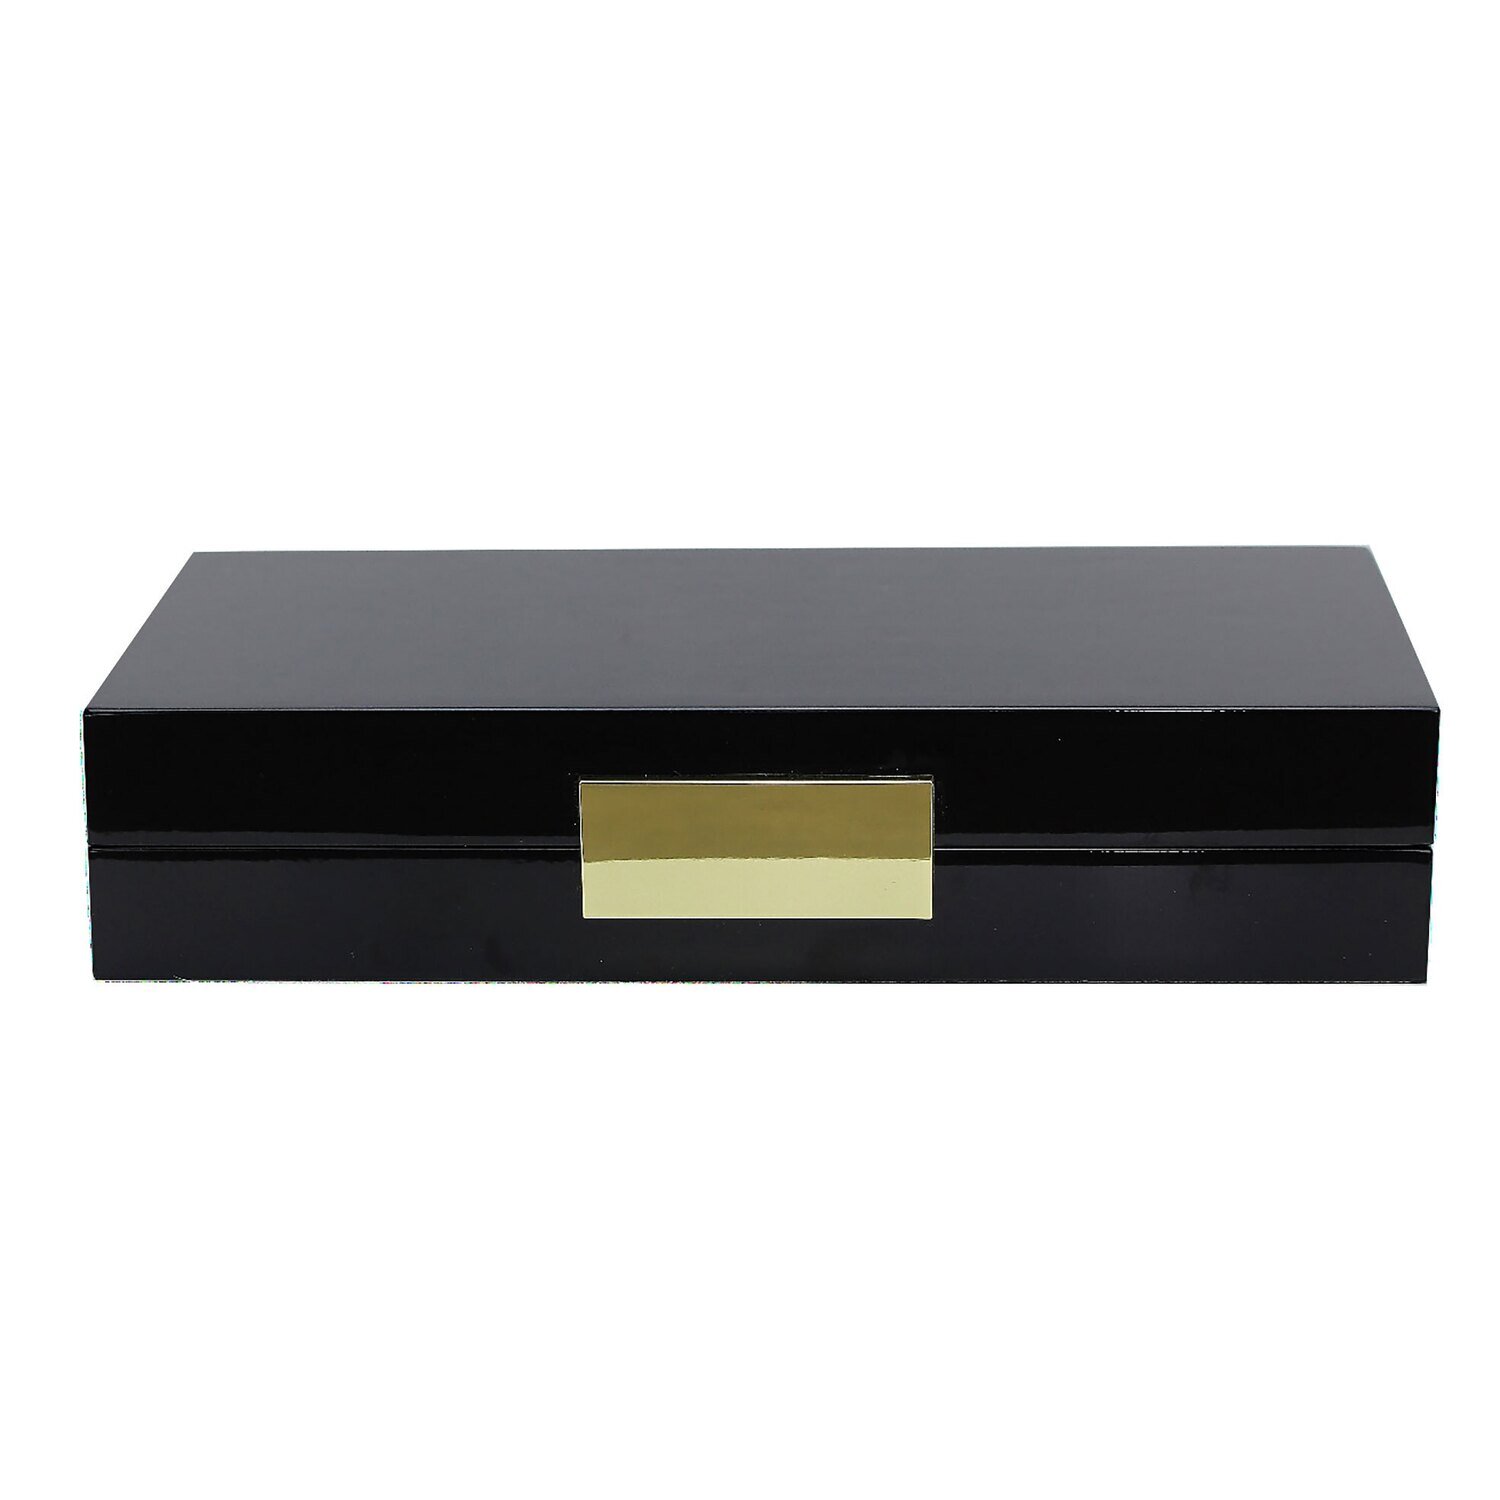 Addison Ross Black Lacquer Box With Gold 4 x 9 Inch Lacquer BX1205